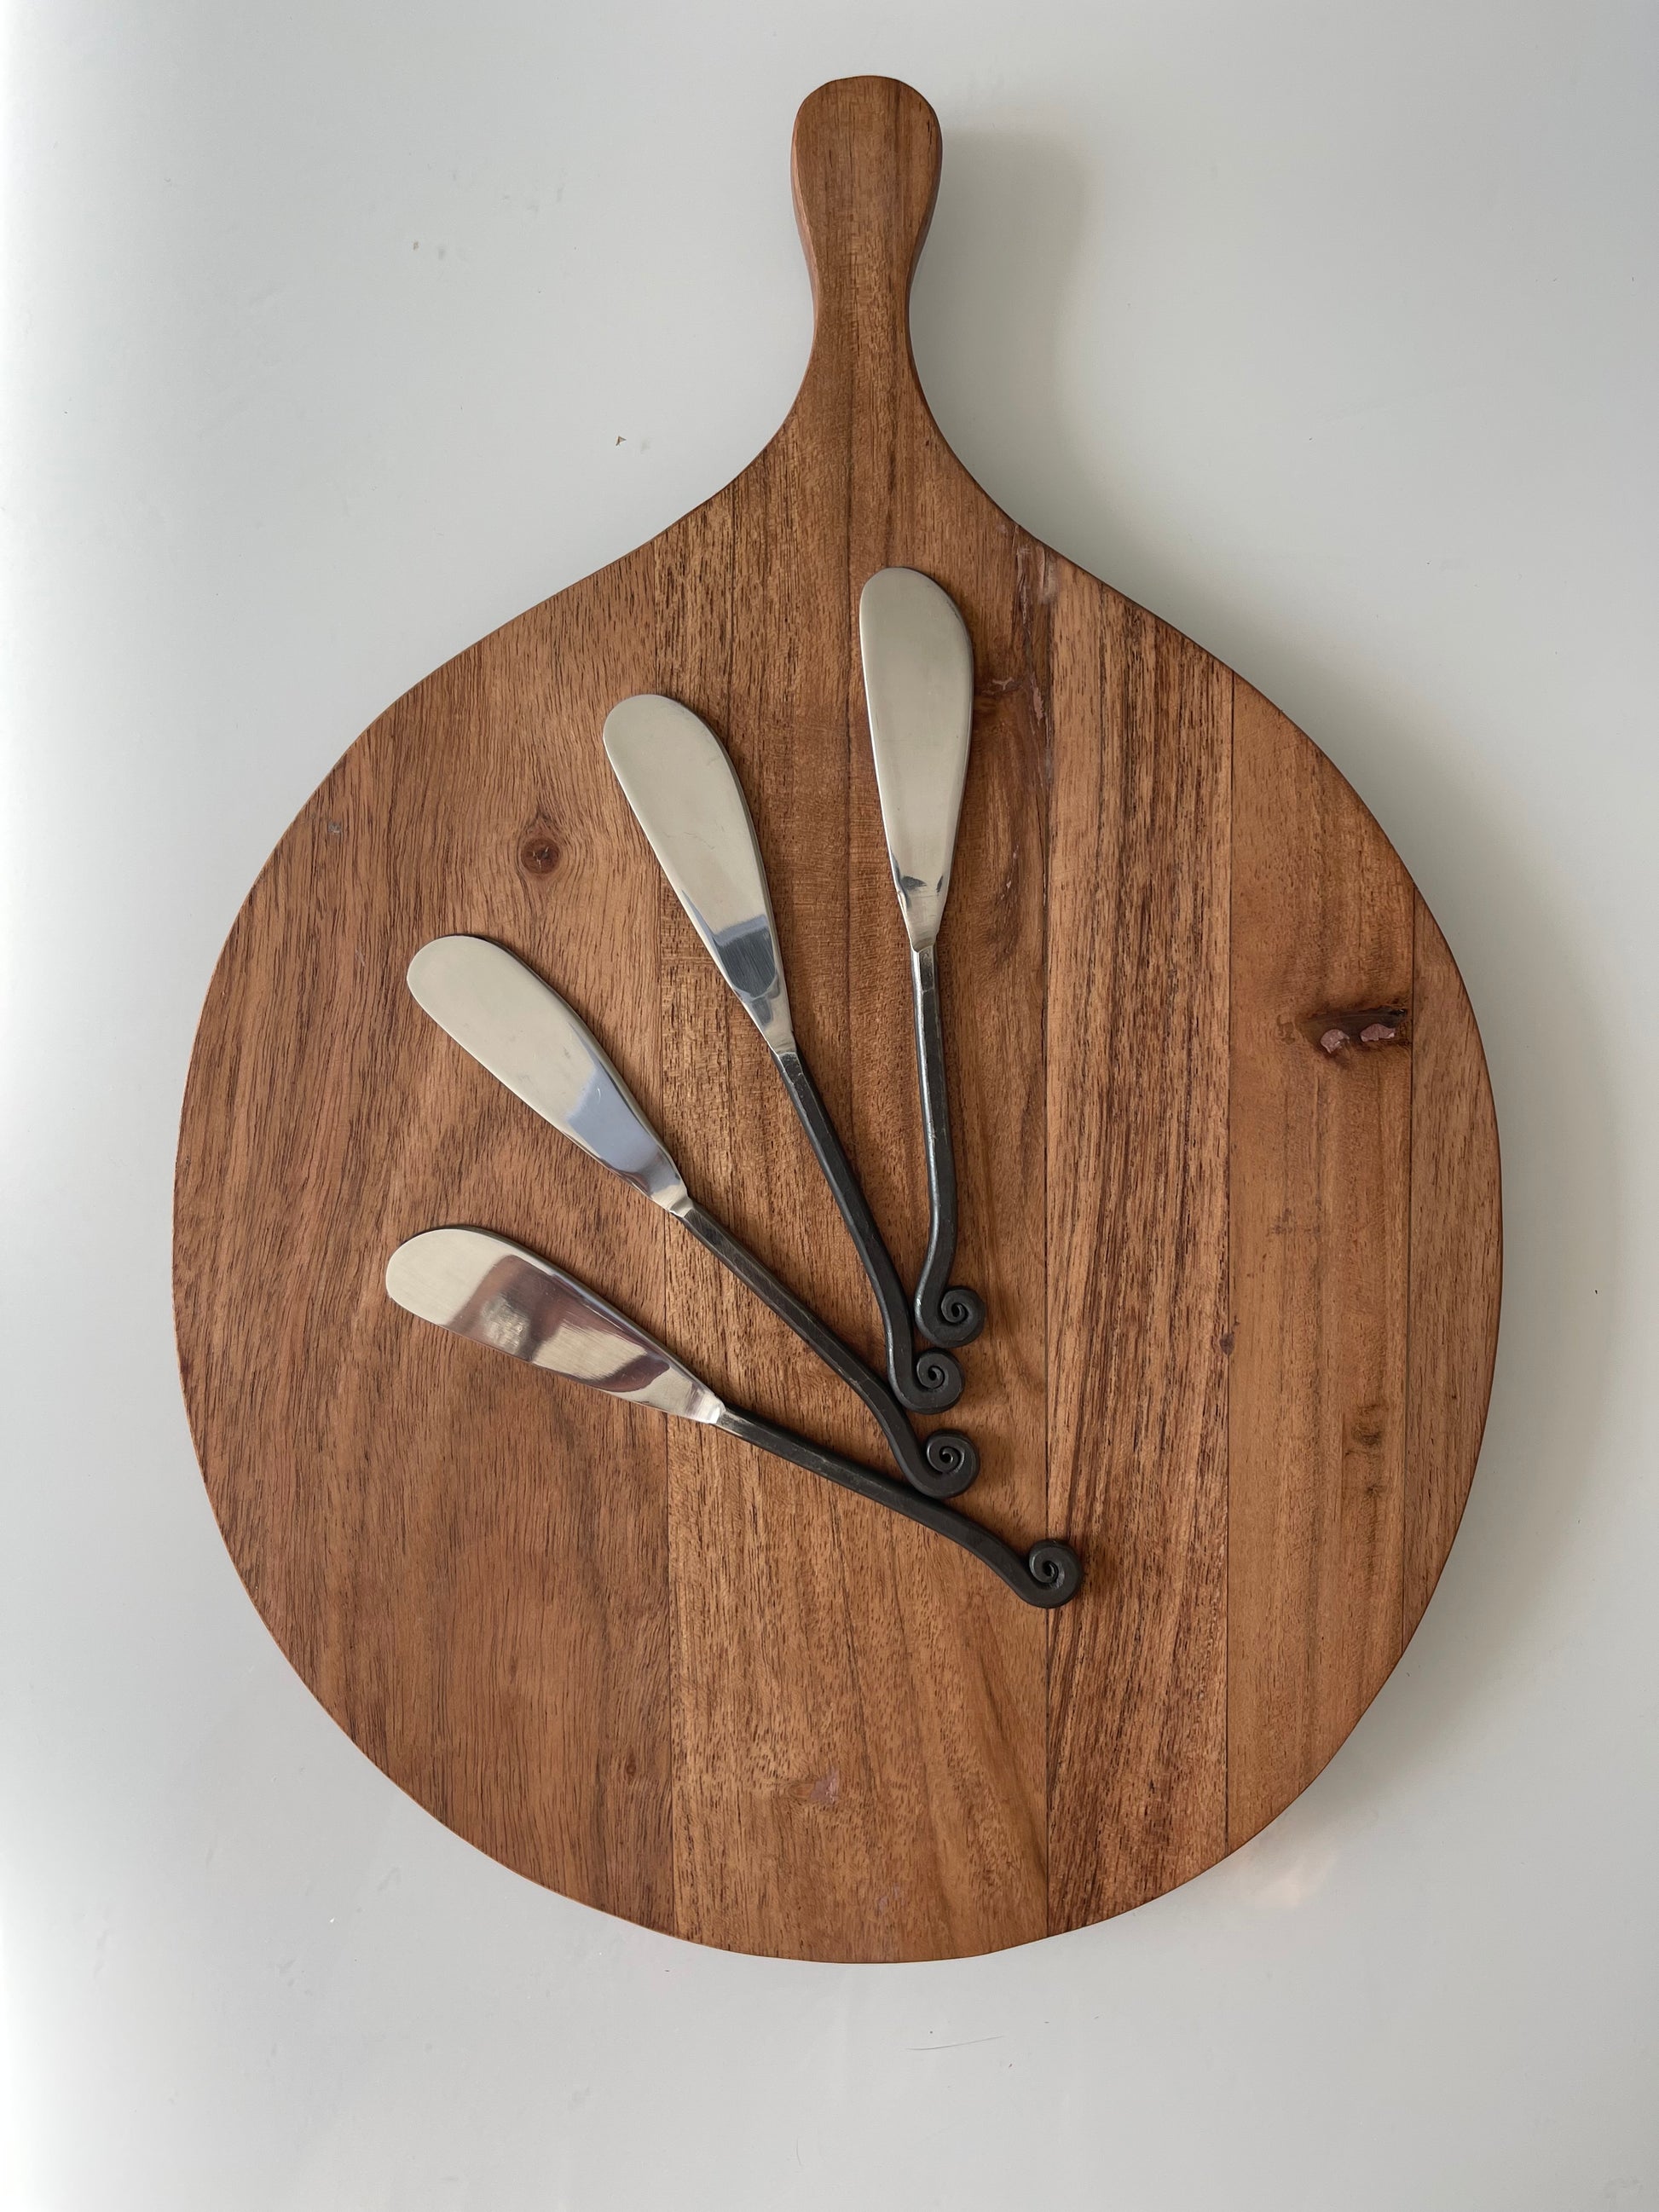 Board shown with Canape Knives. Dimensions 13-3/4"L x 9-3/4"W Acacia Wood Cheese/Cutting Board w/ Handle